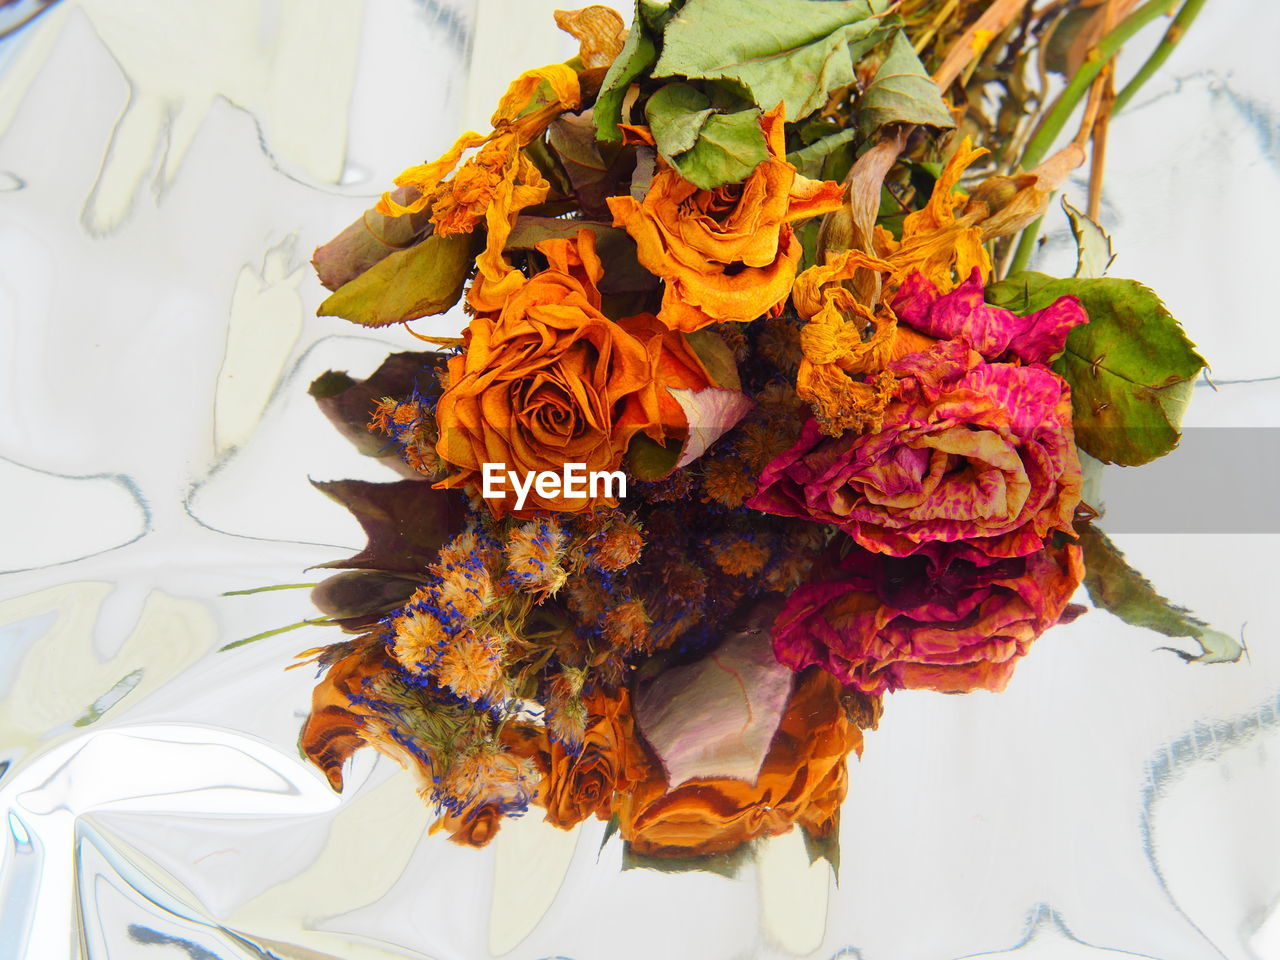 HIGH ANGLE VIEW OF MULTI COLORED ROSE BOUQUET IN POT